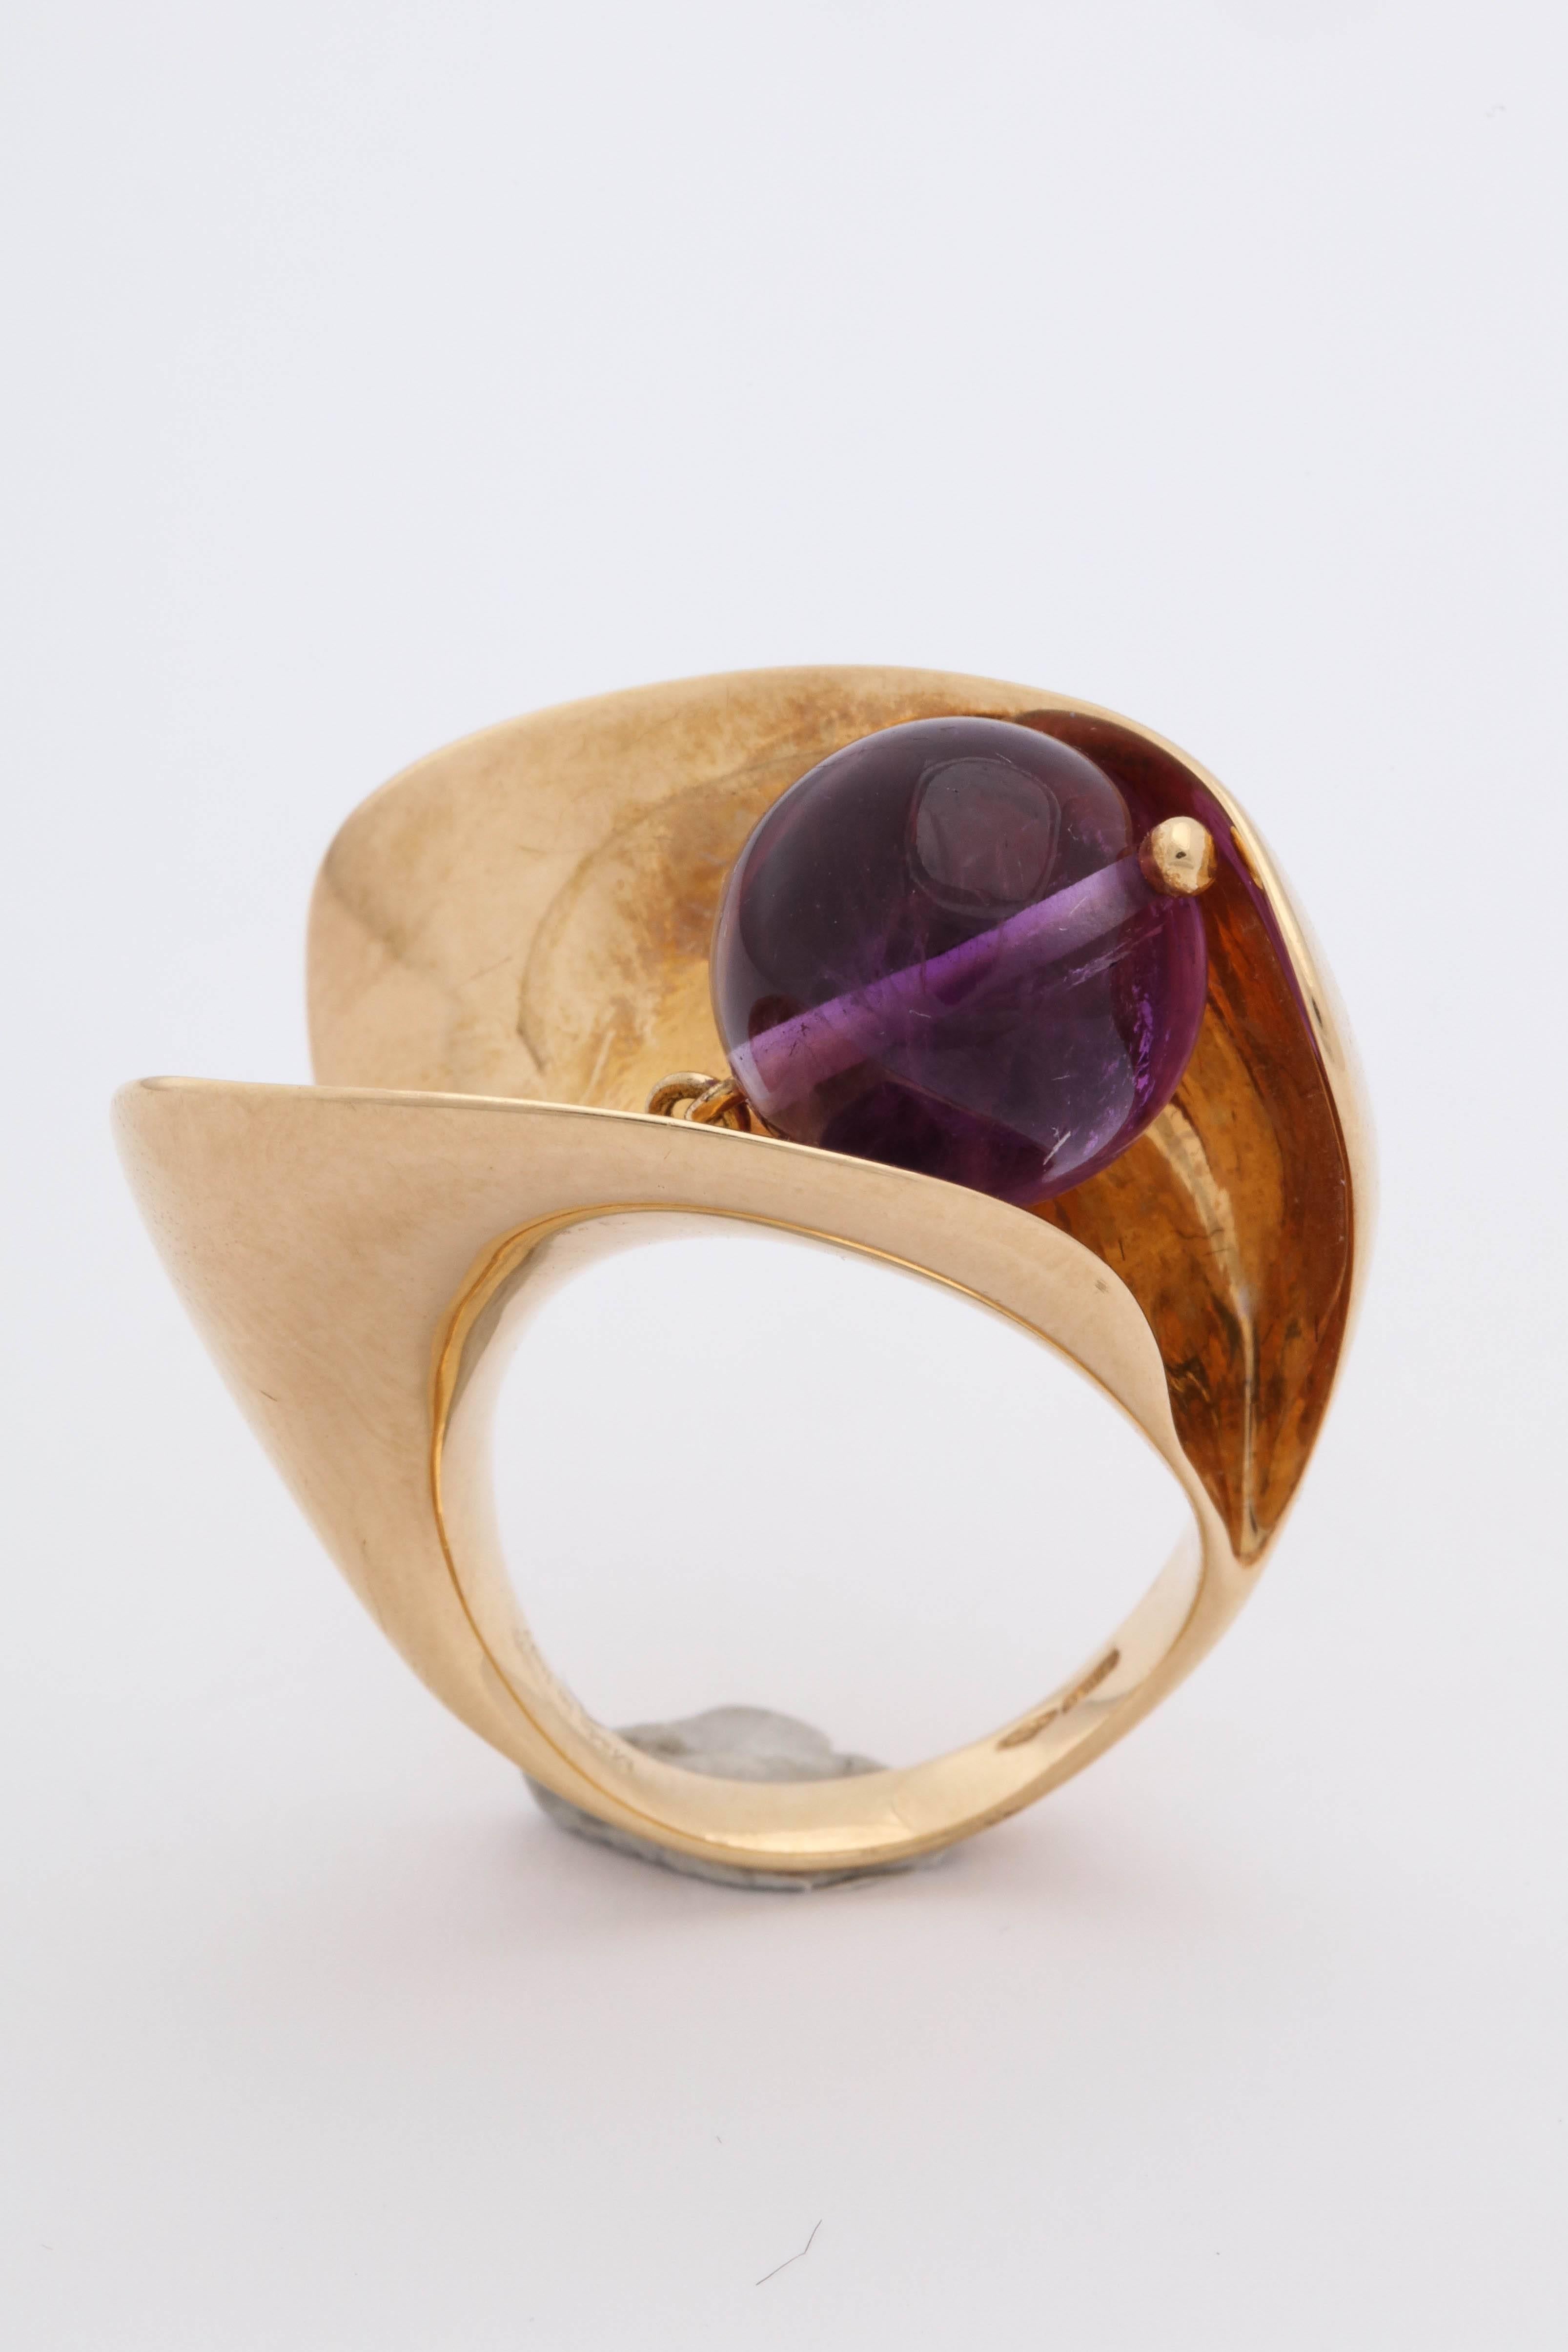 One Ladies Very Cool And Hip 18kt Yellow Gold Sculptural Wave Cocktail Ring Designed With One Moveable And Swivel Amethyst Bead Measuring Approximately 11MM. This Fun Ring Is Designed By Versace,In The 1990's In Italy. Current ring size Is = 7 May